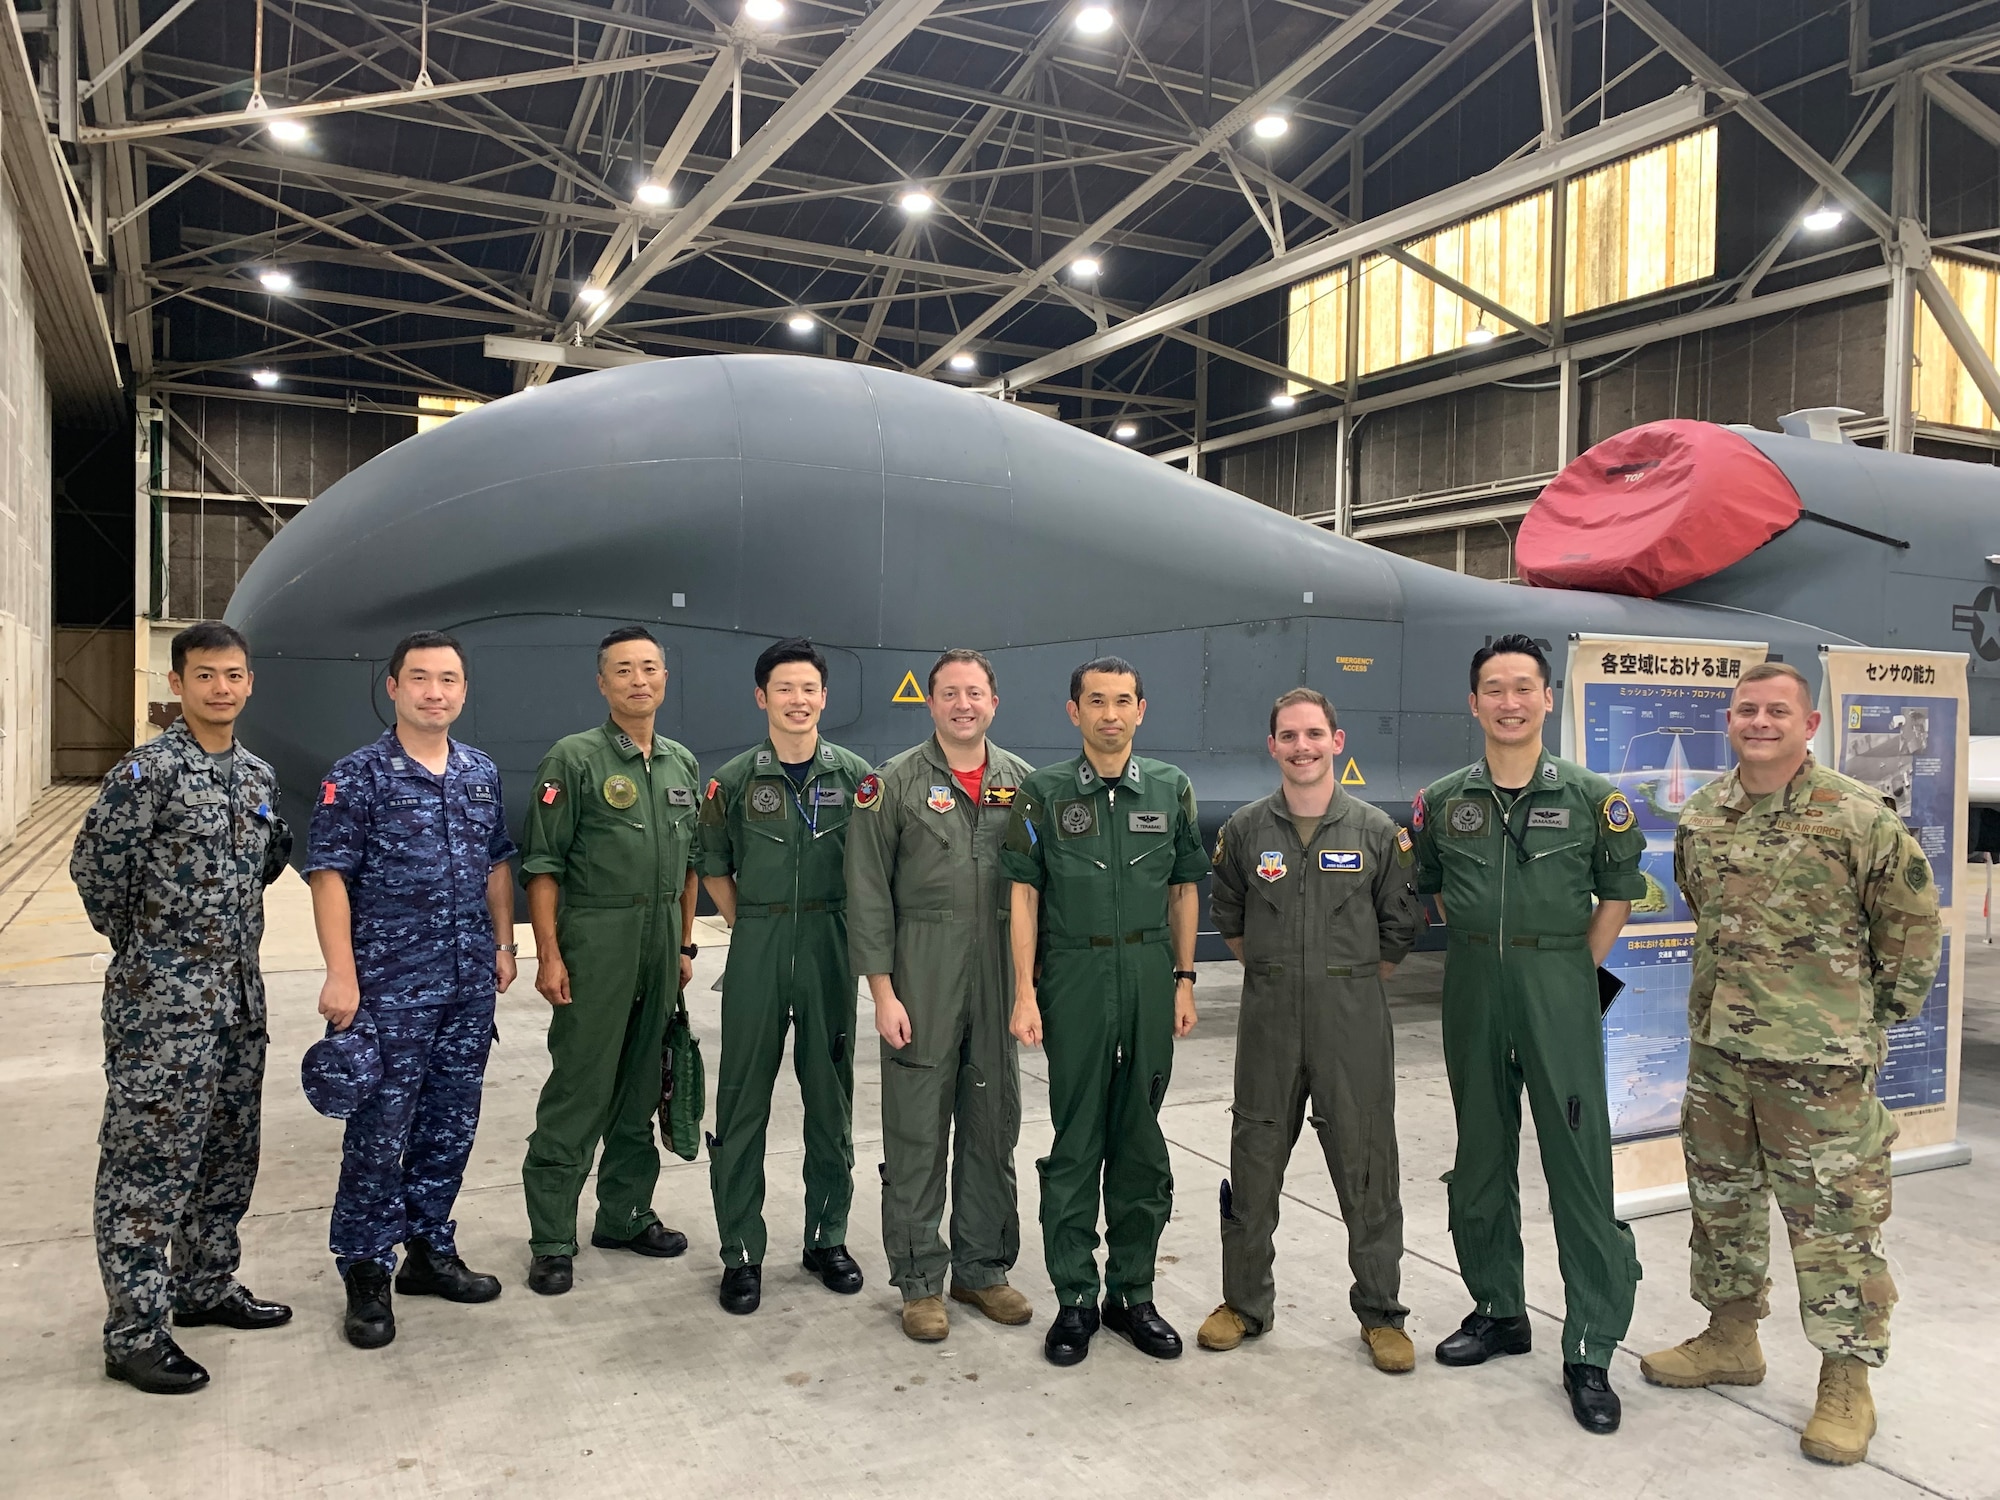 Members of Japan’s Air Defense Command A3/5, U.S. Air Force Brig. Gen. Jesse Friedel (right), 5th Air Force commander, and U.S. Air Force Lt. Col. John Wright (center), 4th Reconnaissance Squadron commander, stand in front of a U.S. Air Force RQ-4 Global Hawk remotely piloted surveillance aircraft July 22, 2022, at Yokota Air Base, Japan. The Japanese and American military leaders met to build a path to future allied success. (Courtesy photo)